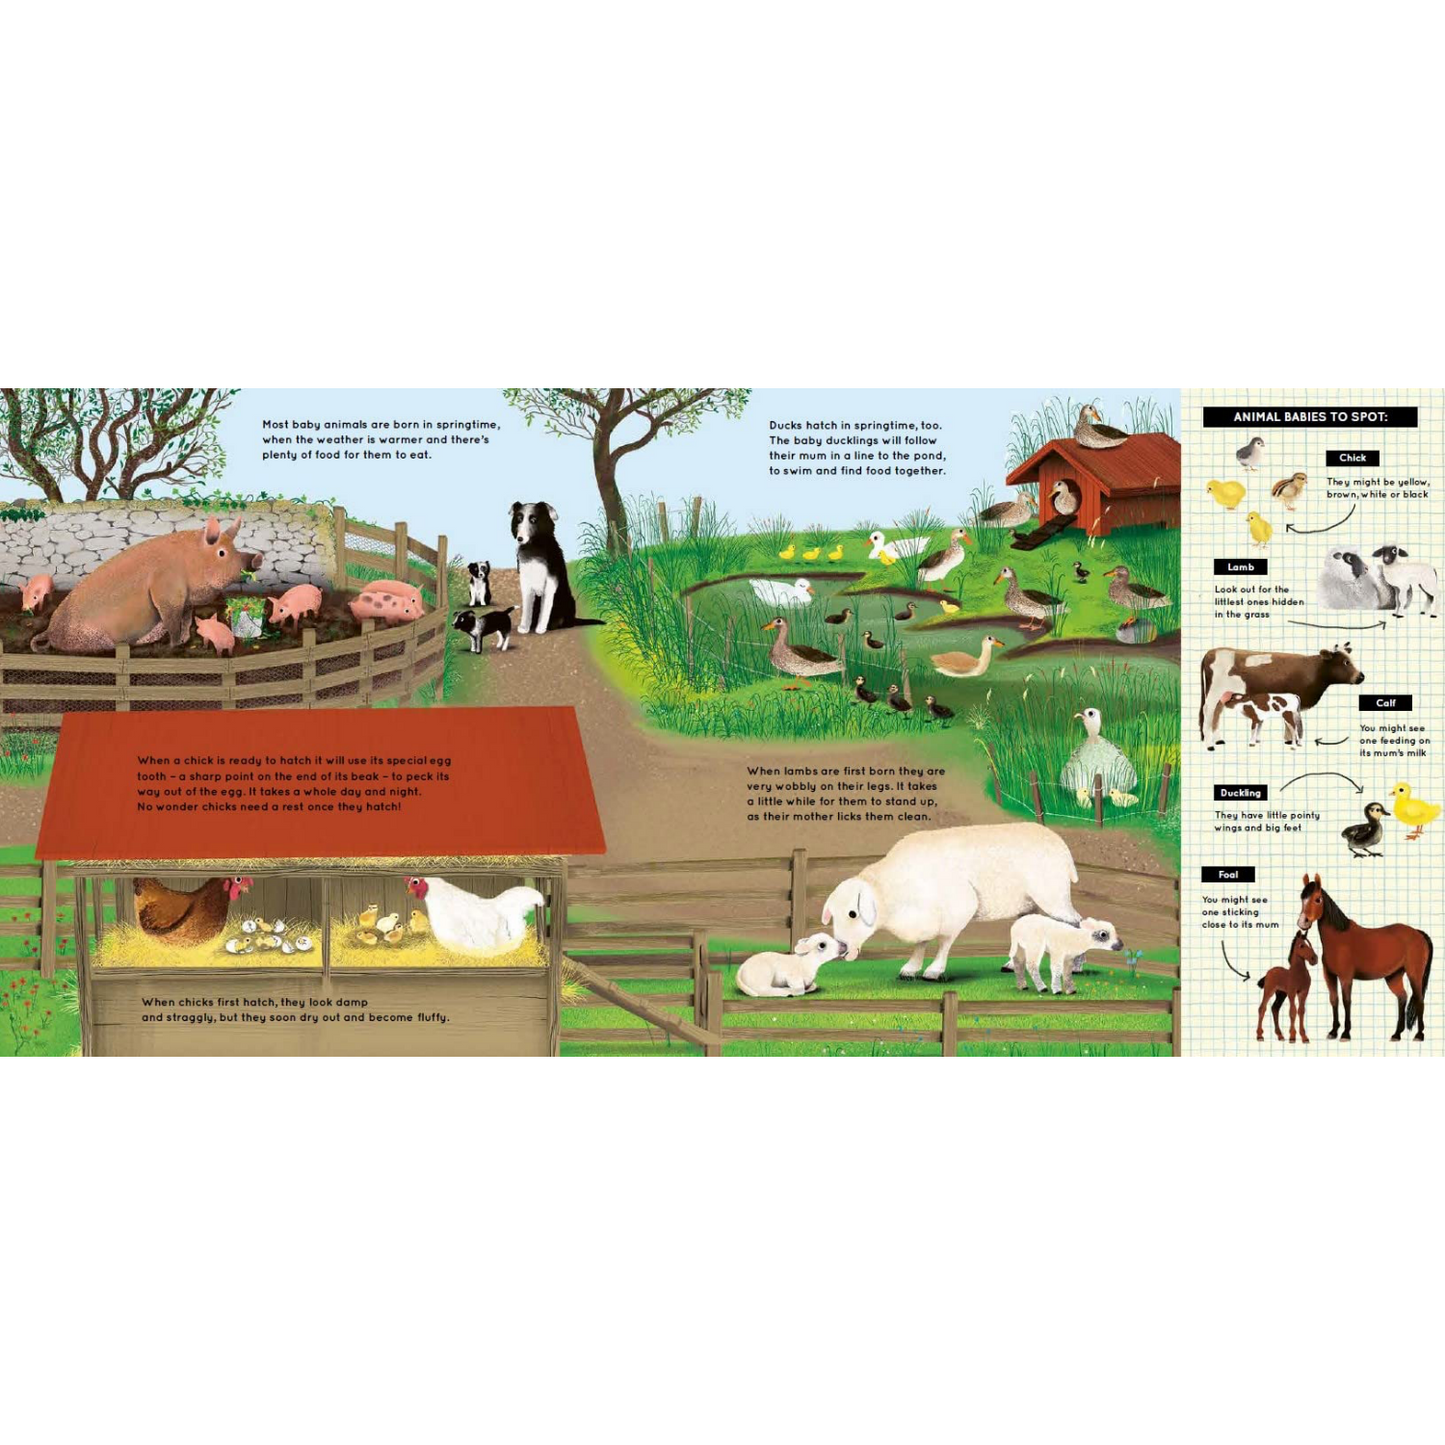 Look What I Found on the Farm | Children’s Book on Farm Life